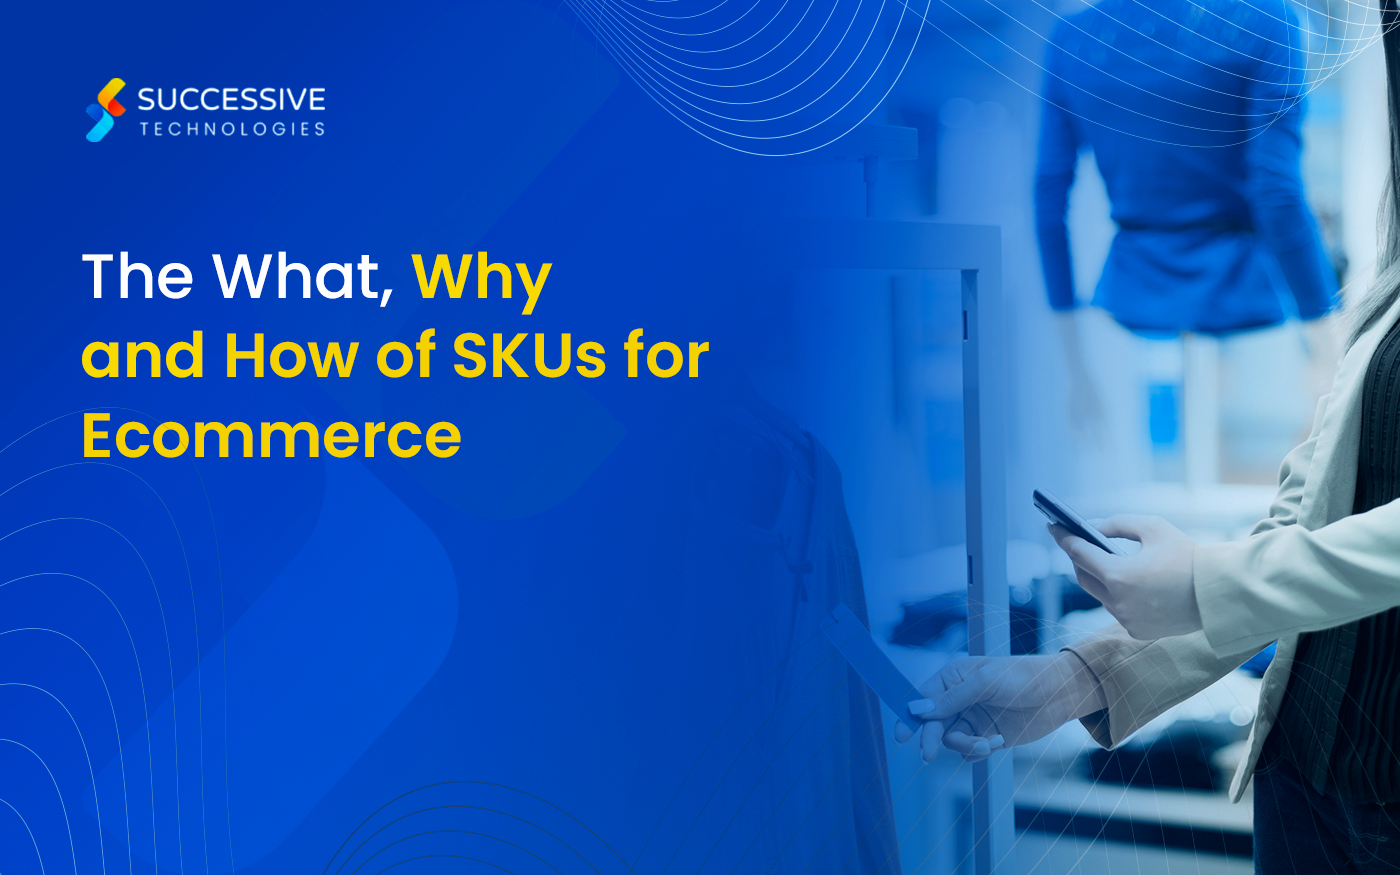 The What, Why and How of SKUs for Ecommerce